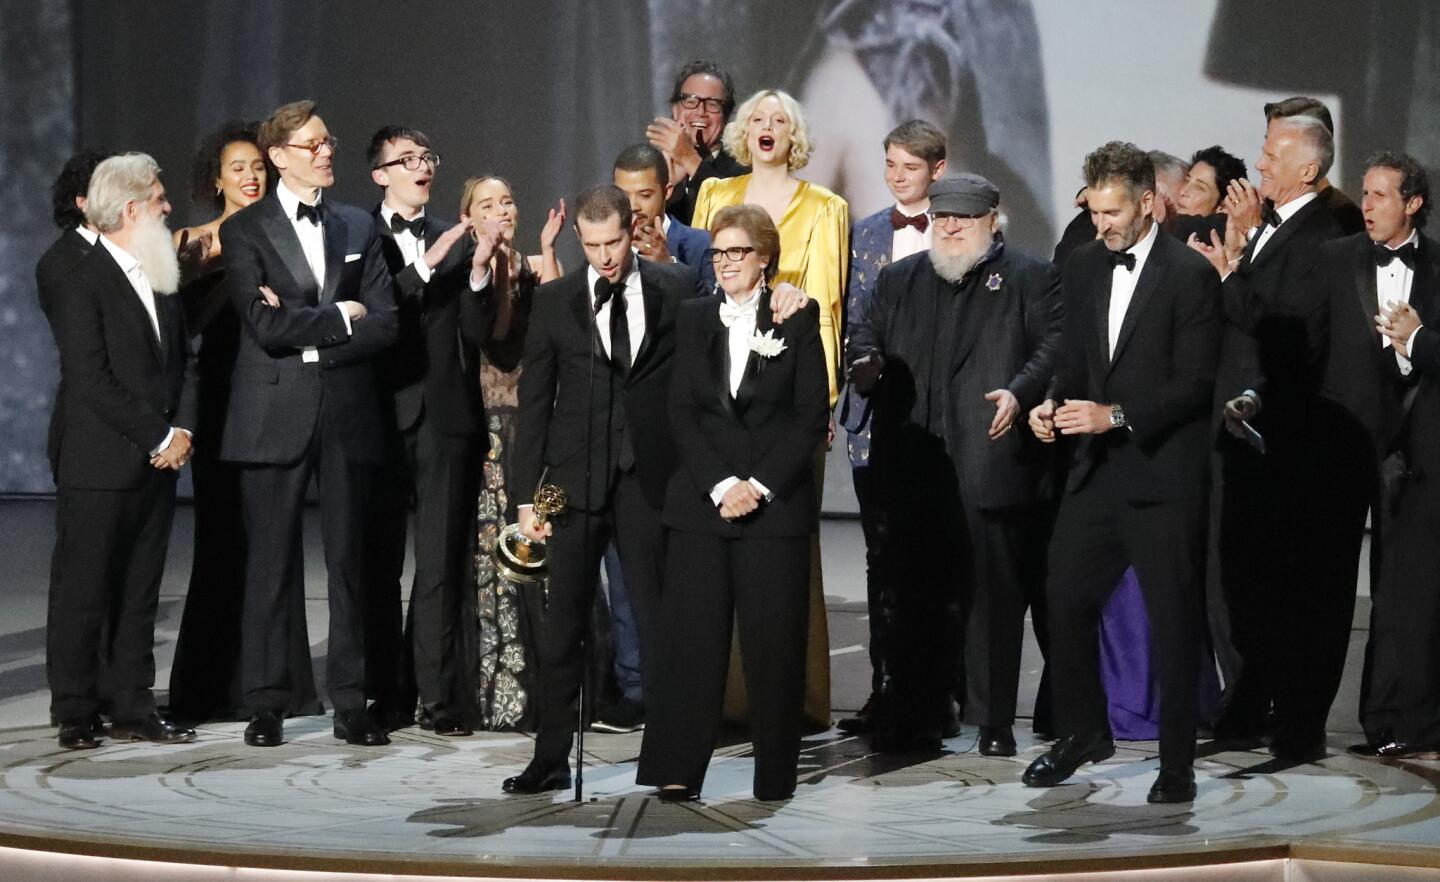 The cast and crew of "Game of Thrones" on stage accepting the outstanding drama series award during the show at the 70th Primetime Emmy Awards.